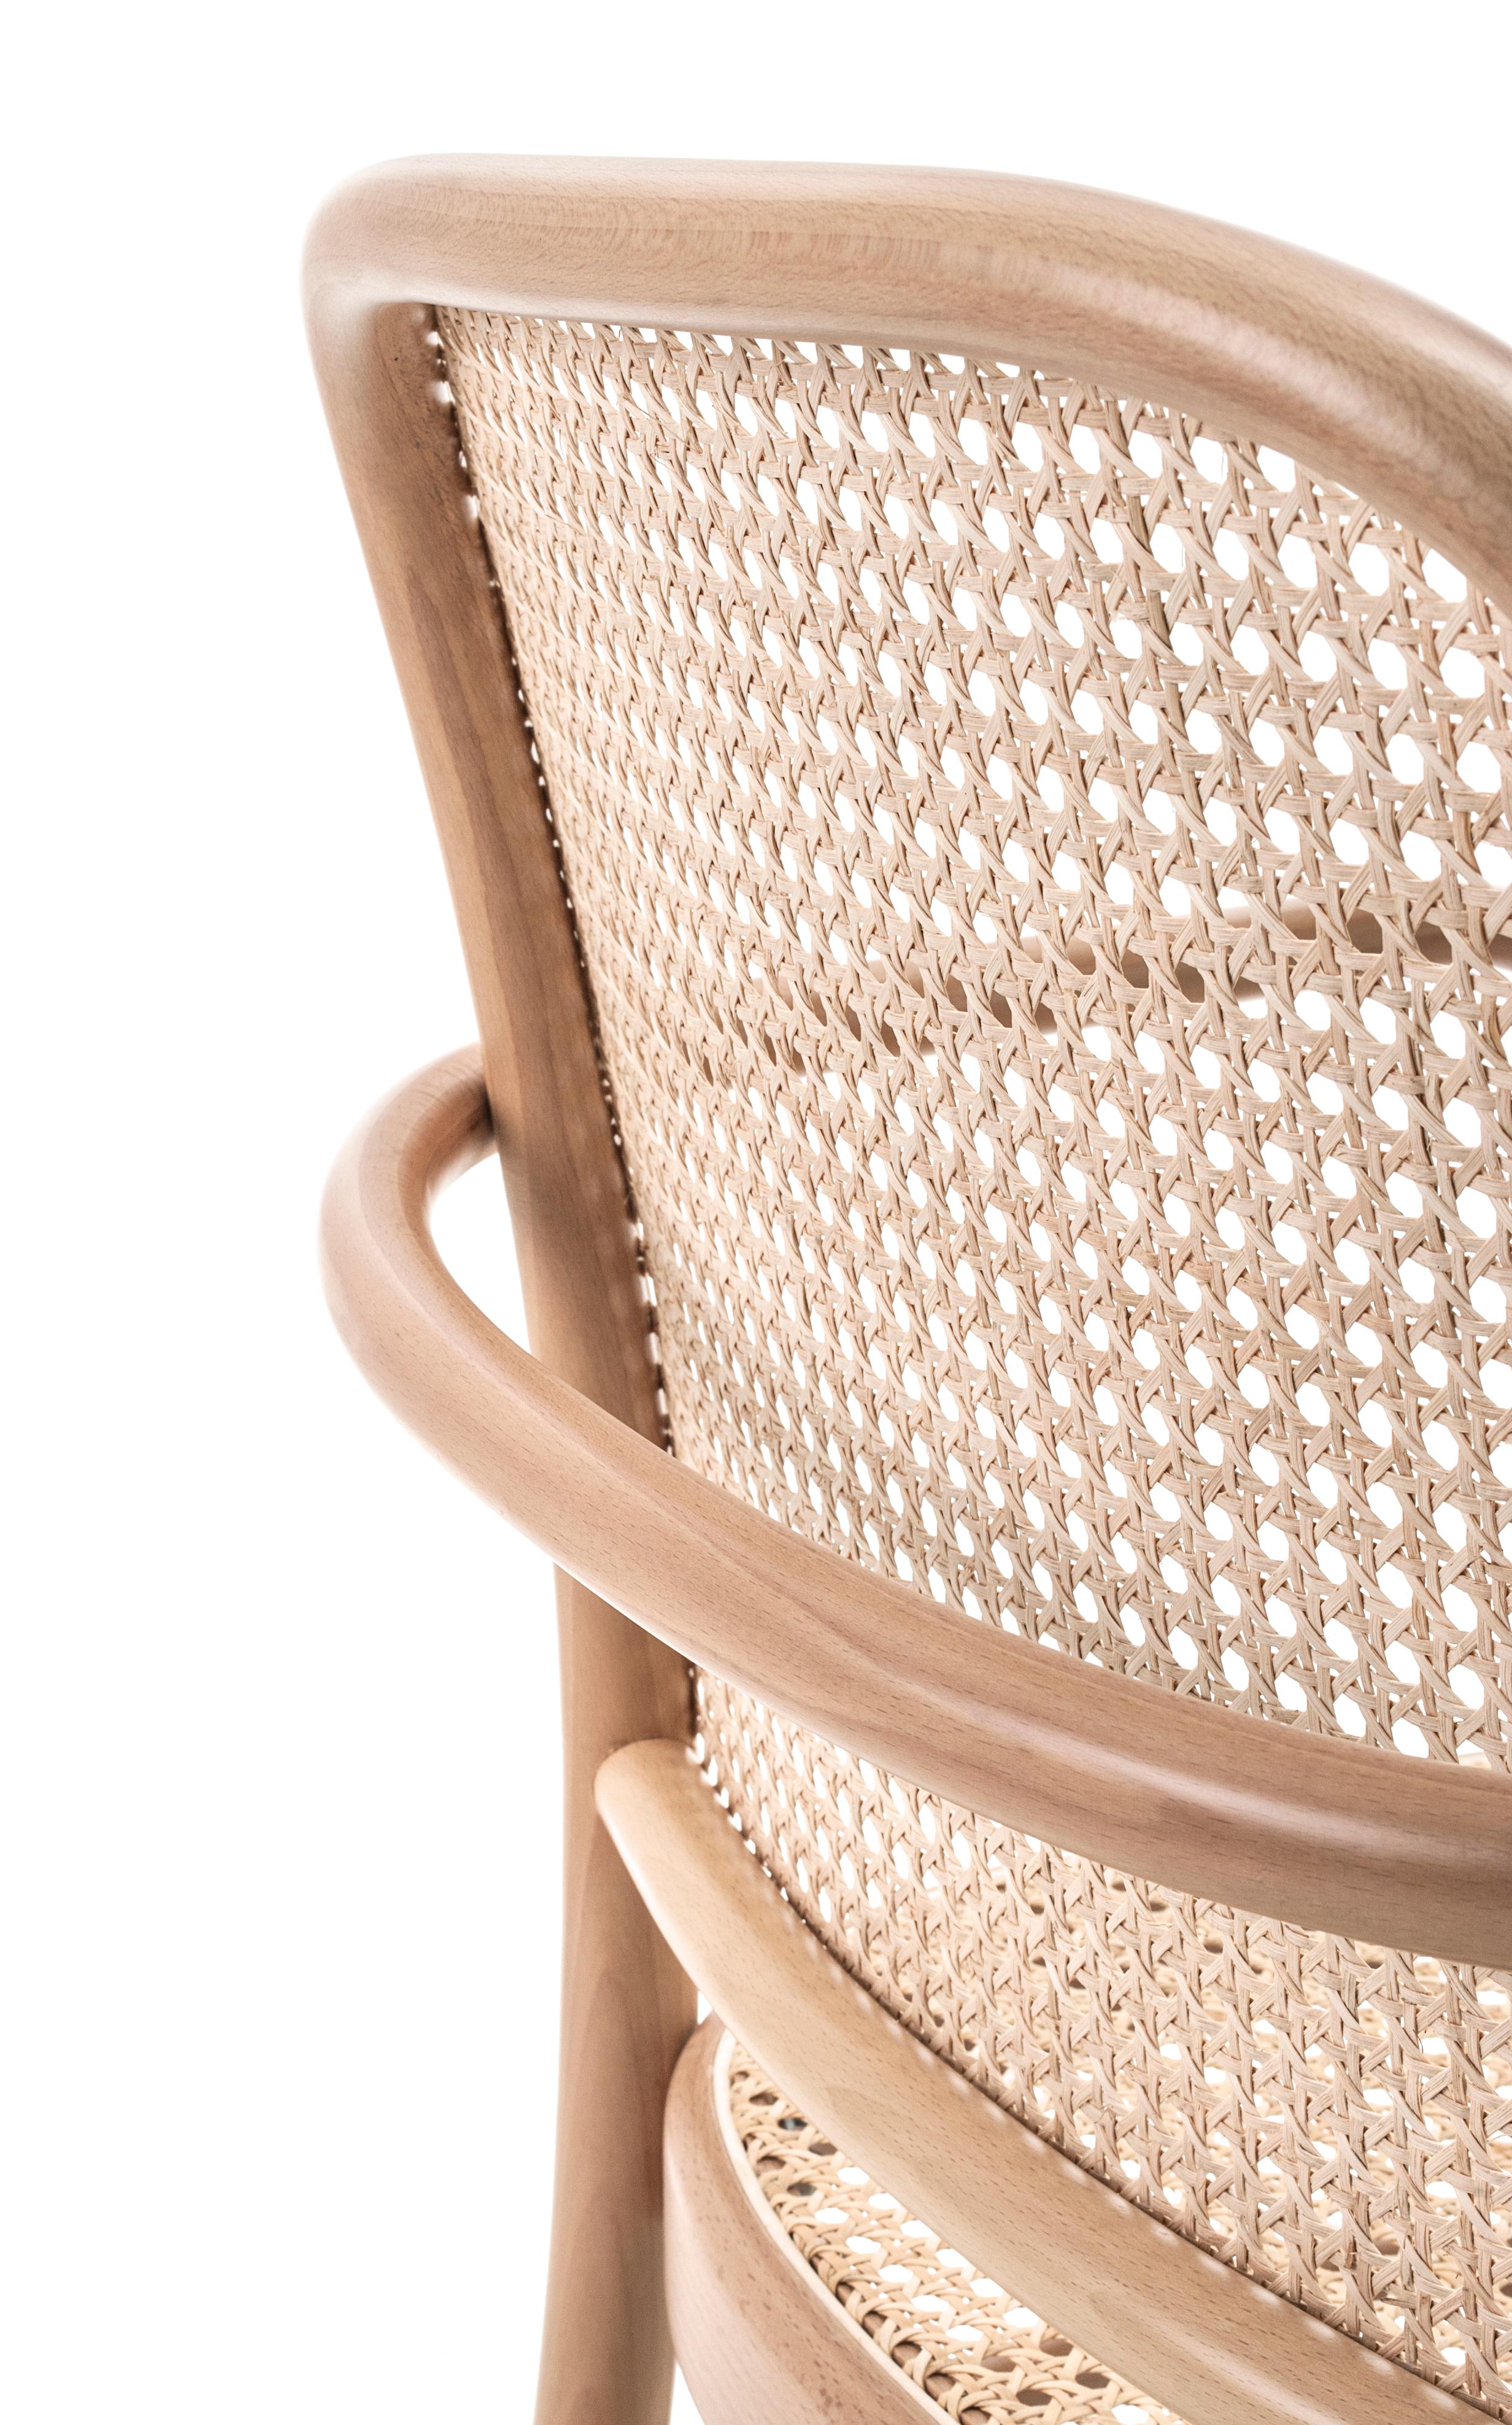 Bent-beech wood chair and armchair designed by Josef Hoffmann in 1930. A timeless and modern design gives the chair N. 811 an outstanding comfort and lightness. Available in three versions: woven cane seat and backrest, upholstered seat and woven